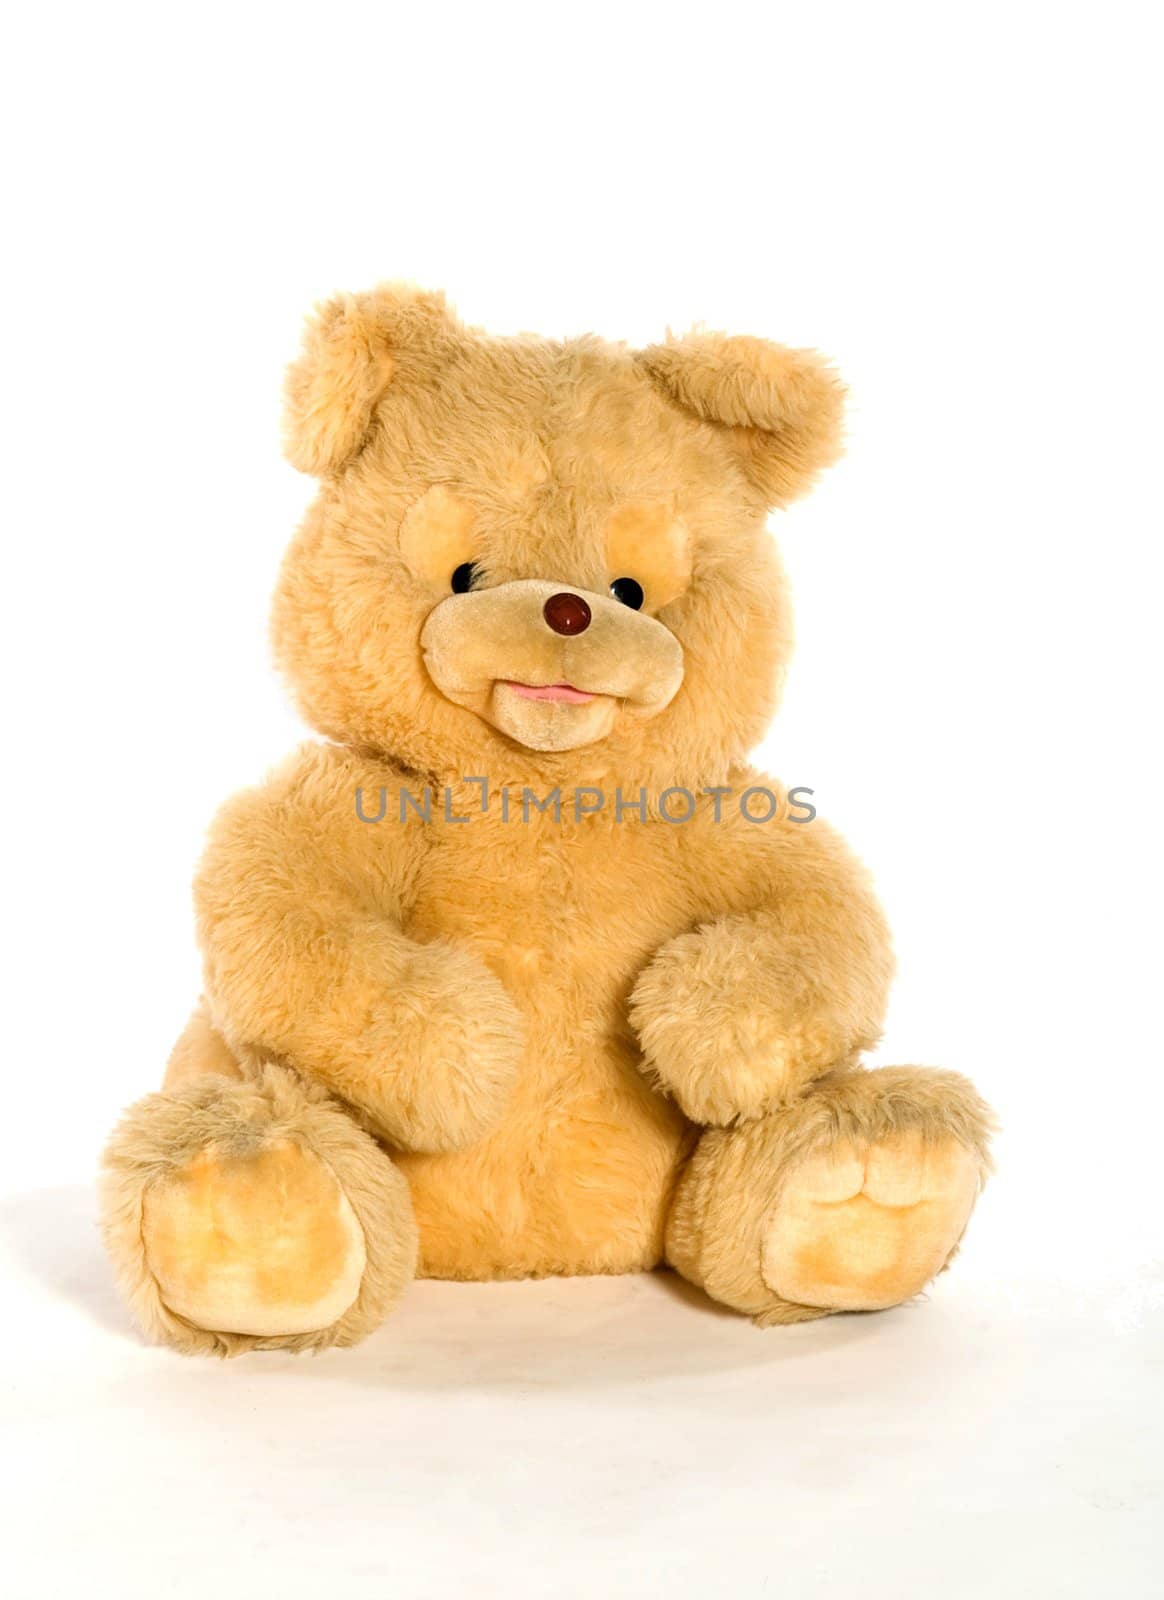 Yellow teddy bear isolated on white